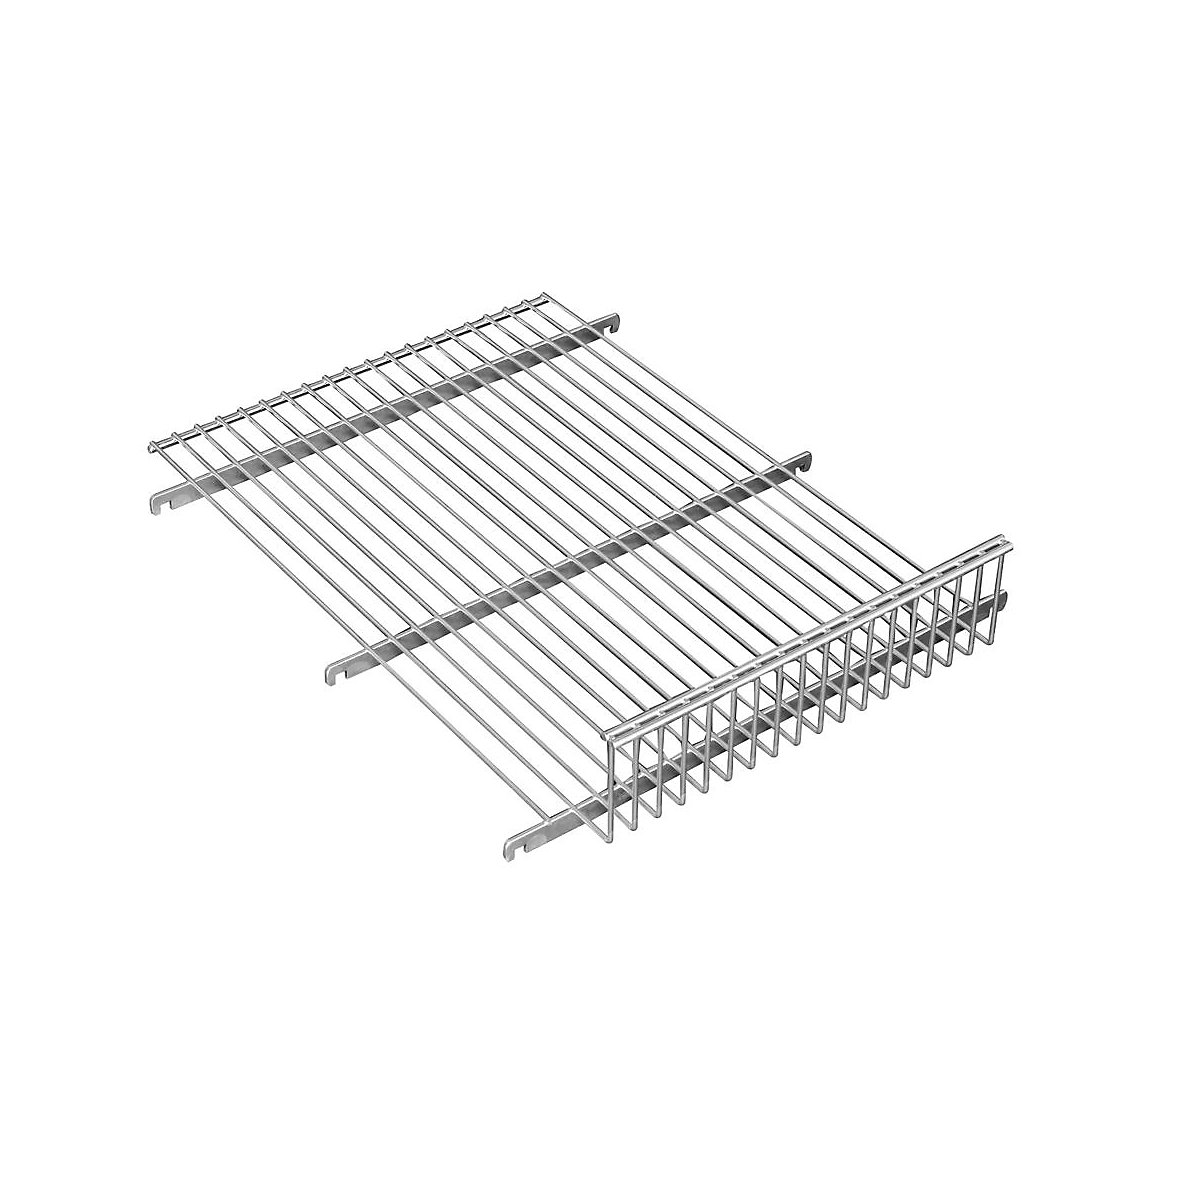 Intermediate shelf for steel roll container, for WxD 640 x 460 mm, with 100 mm raised edges, interior height 100 mm